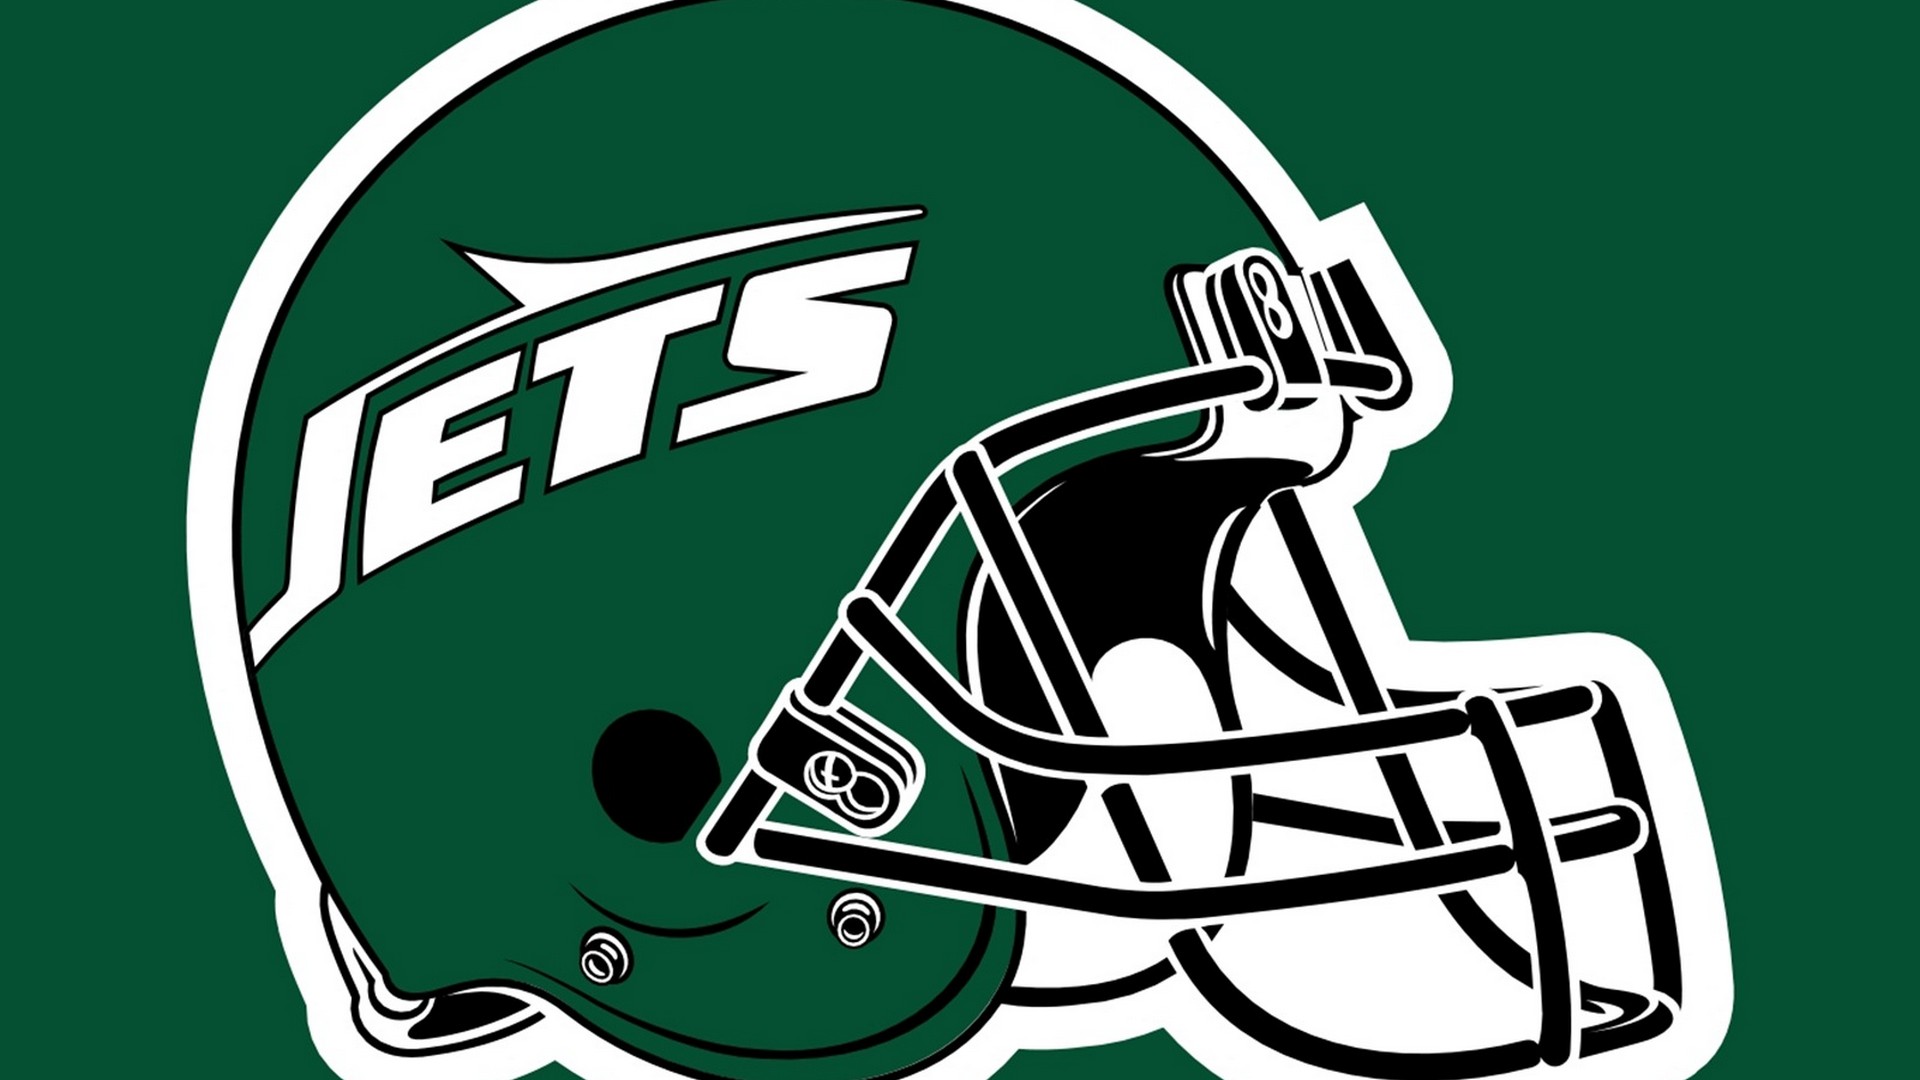 New York Jets Desktop Wallpapers with resolution 1920x1080 pixel. You can make this wallpaper for your Mac or Windows Desktop Background, iPhone, Android or Tablet and another Smartphone device